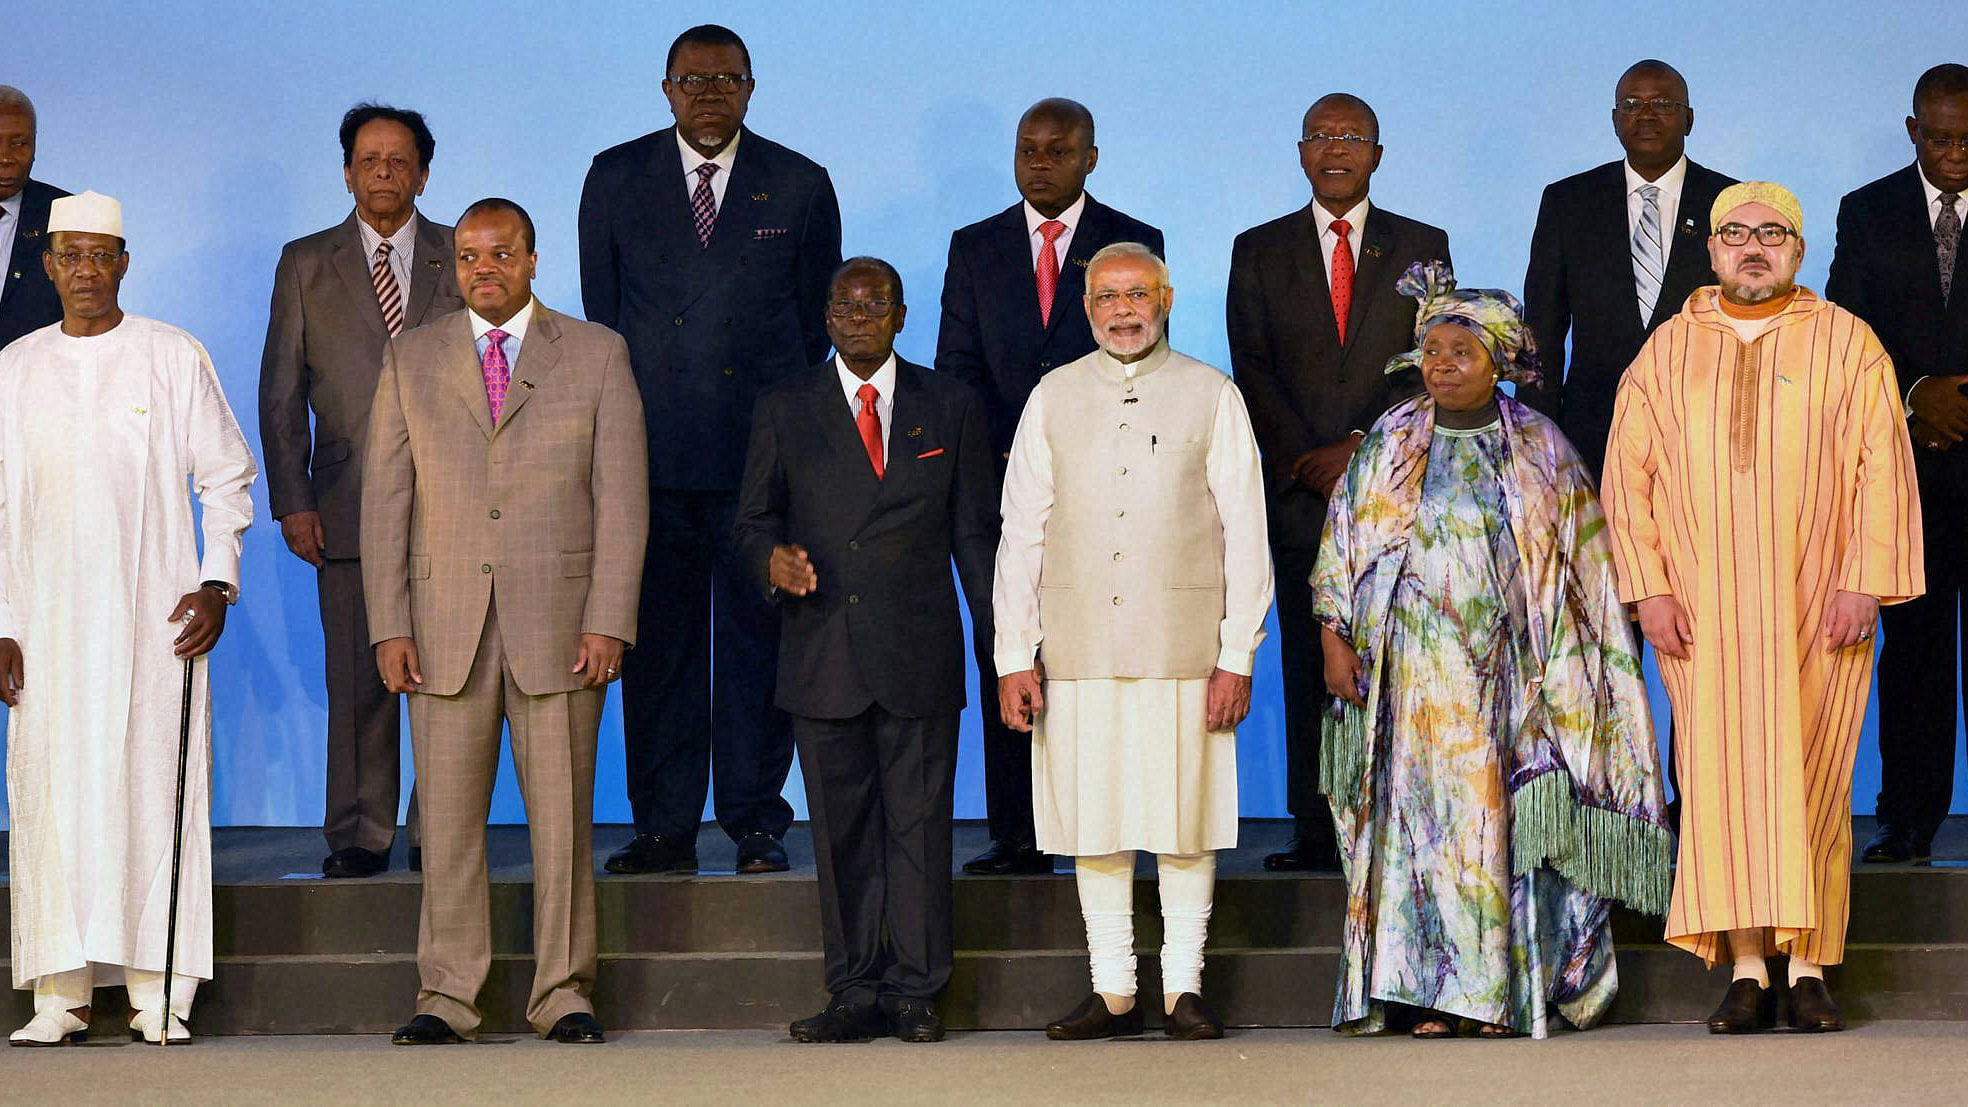 Prime Minister Narendra Modi with IAFS delegations during the India Africa Forum Summit at Indira Gandhi Sports Complex, in New Delhi. (Photo: PTI)&nbsp;